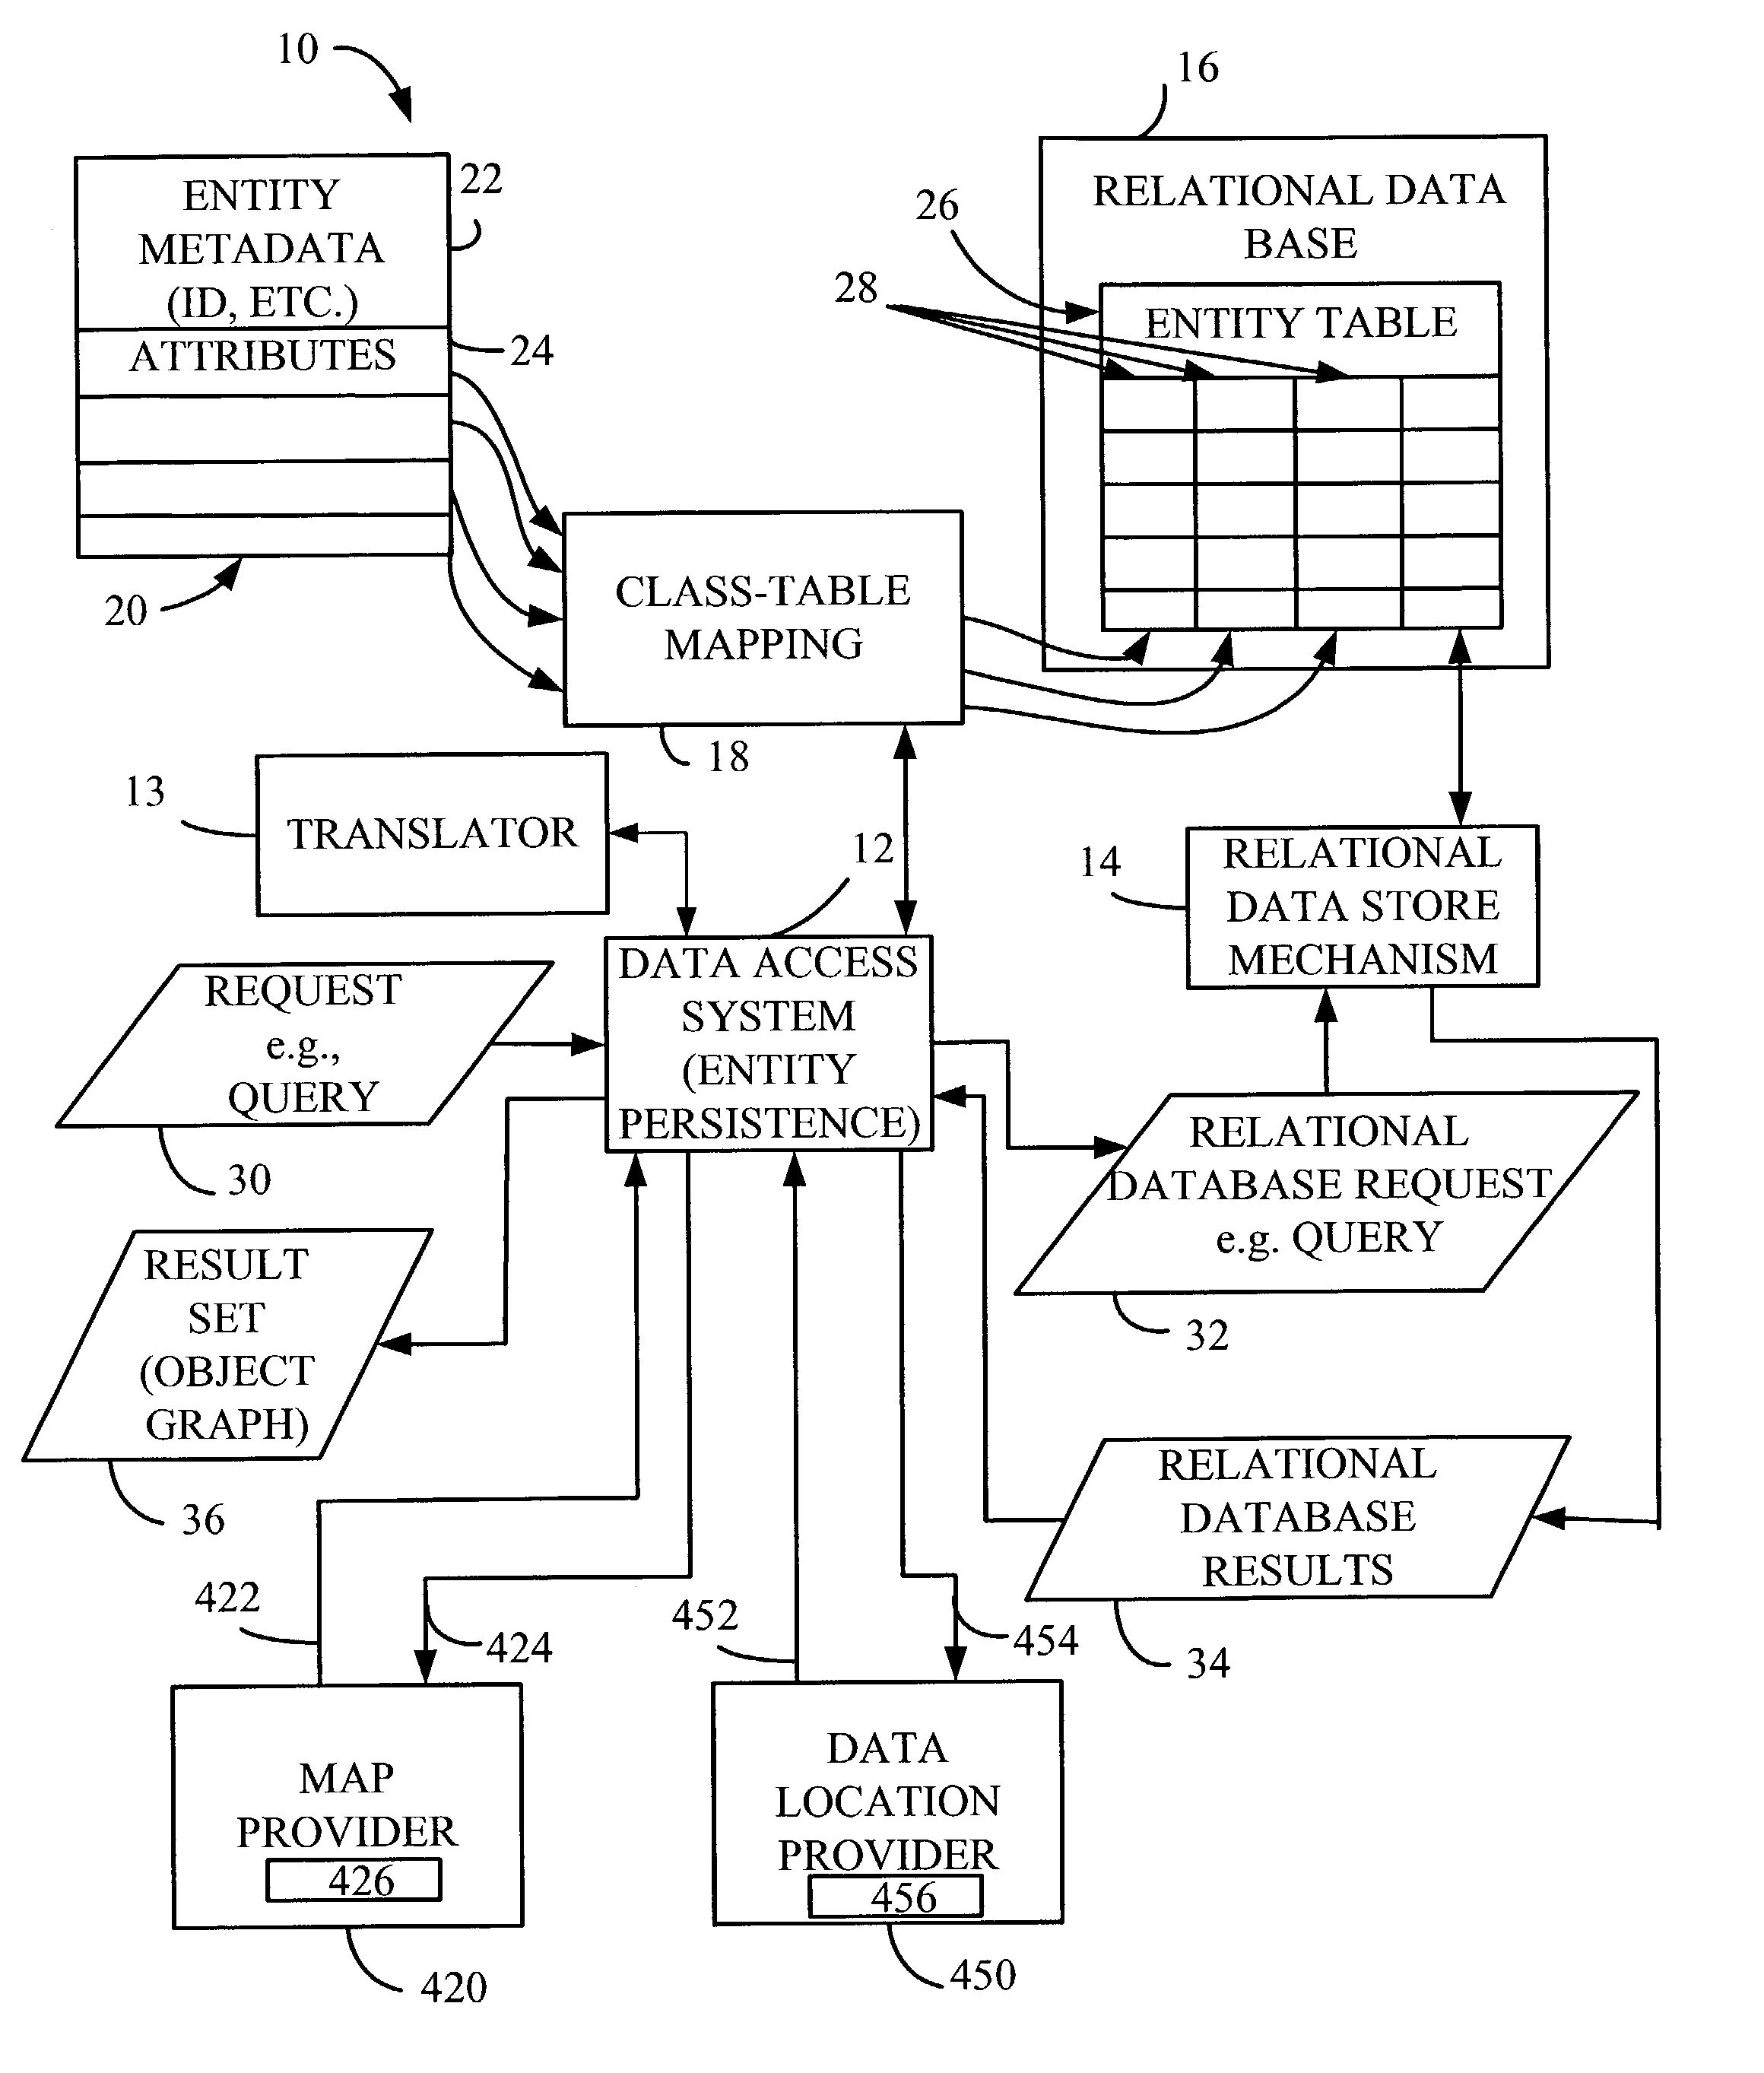 Object graph faulting and trimming in an object-relational database system